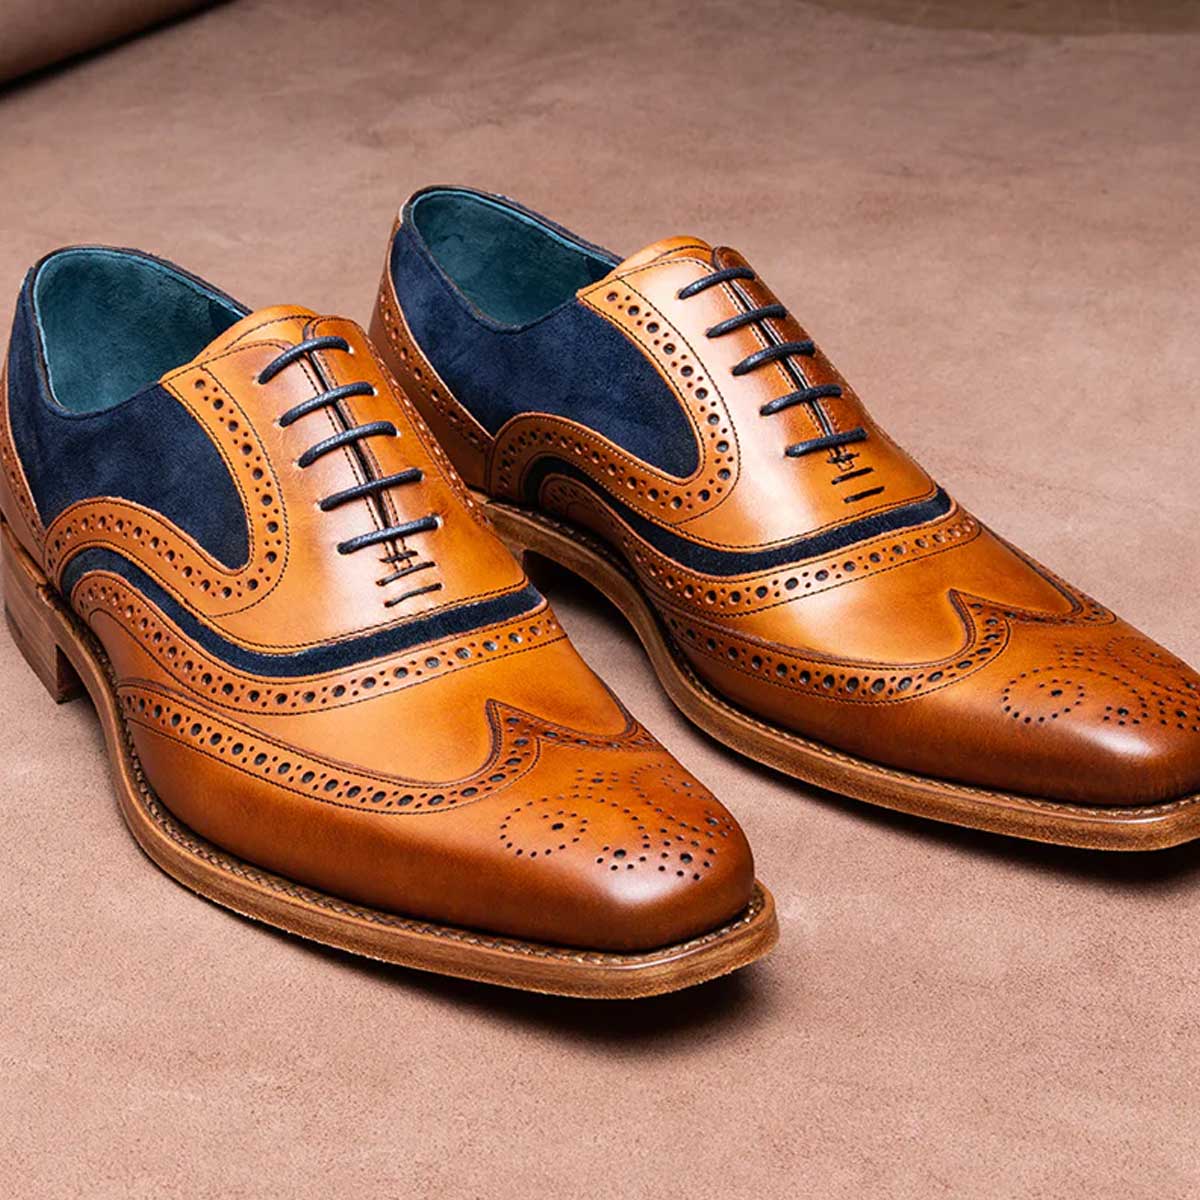 Barker Shoes Goodyear Welted 7mm Leather Soles